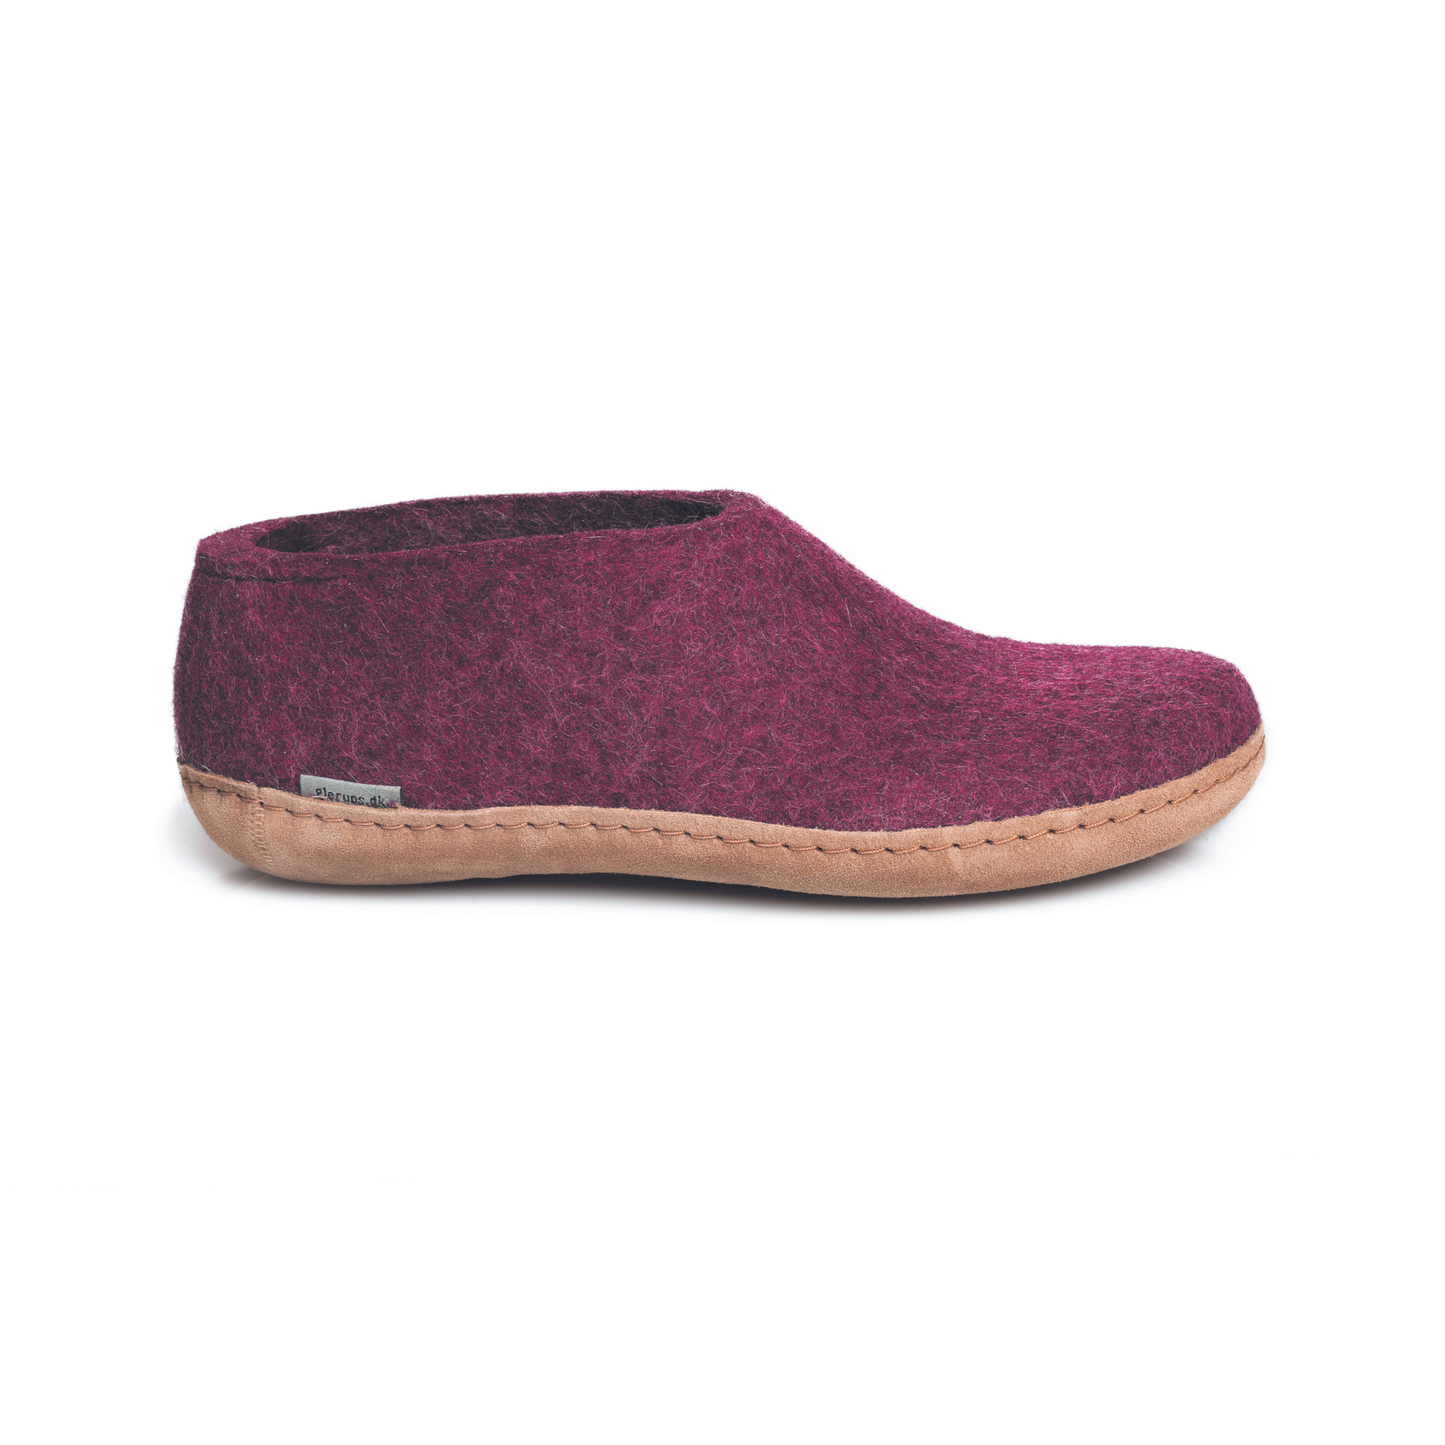 A dark-mauve slipper is pictured in profile, showing the high back of the heel. The bottom lined in tan leather has a small tag with the brand name attached in the seam where the leather meets the felted wool.